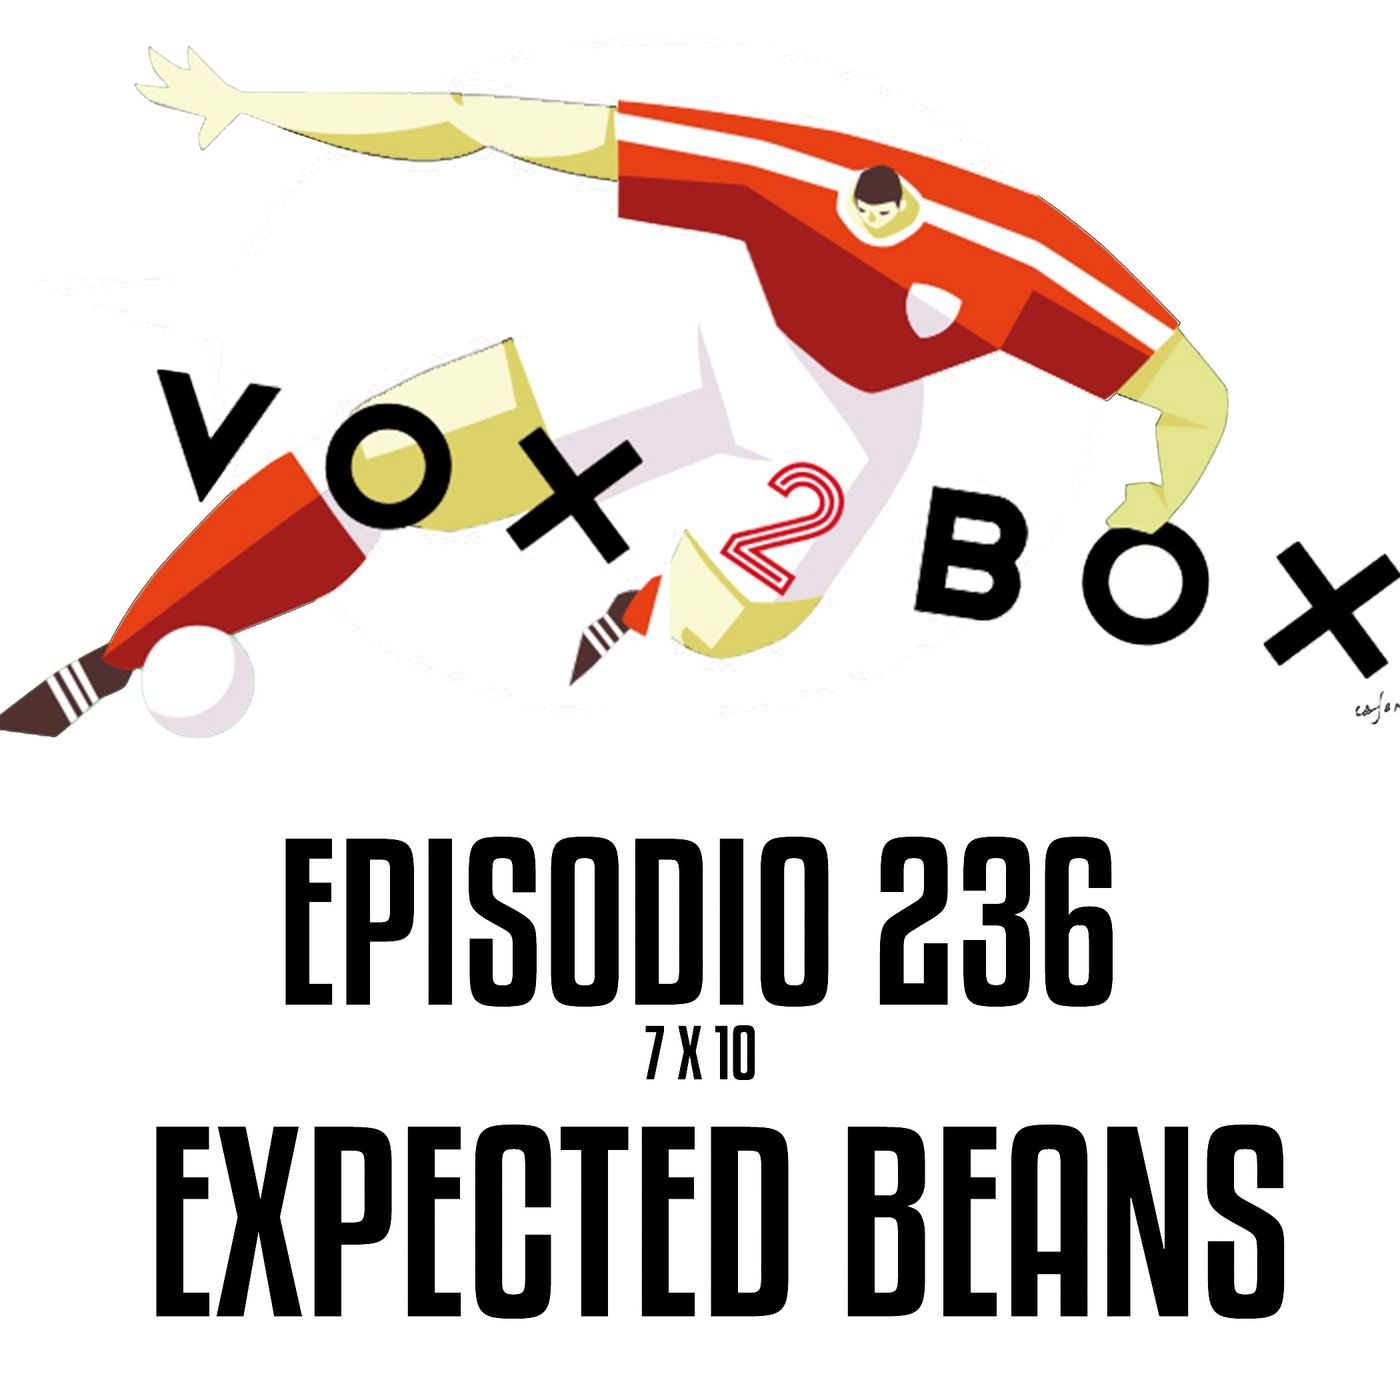 Episodio 236 (7x10) - Expected Beans